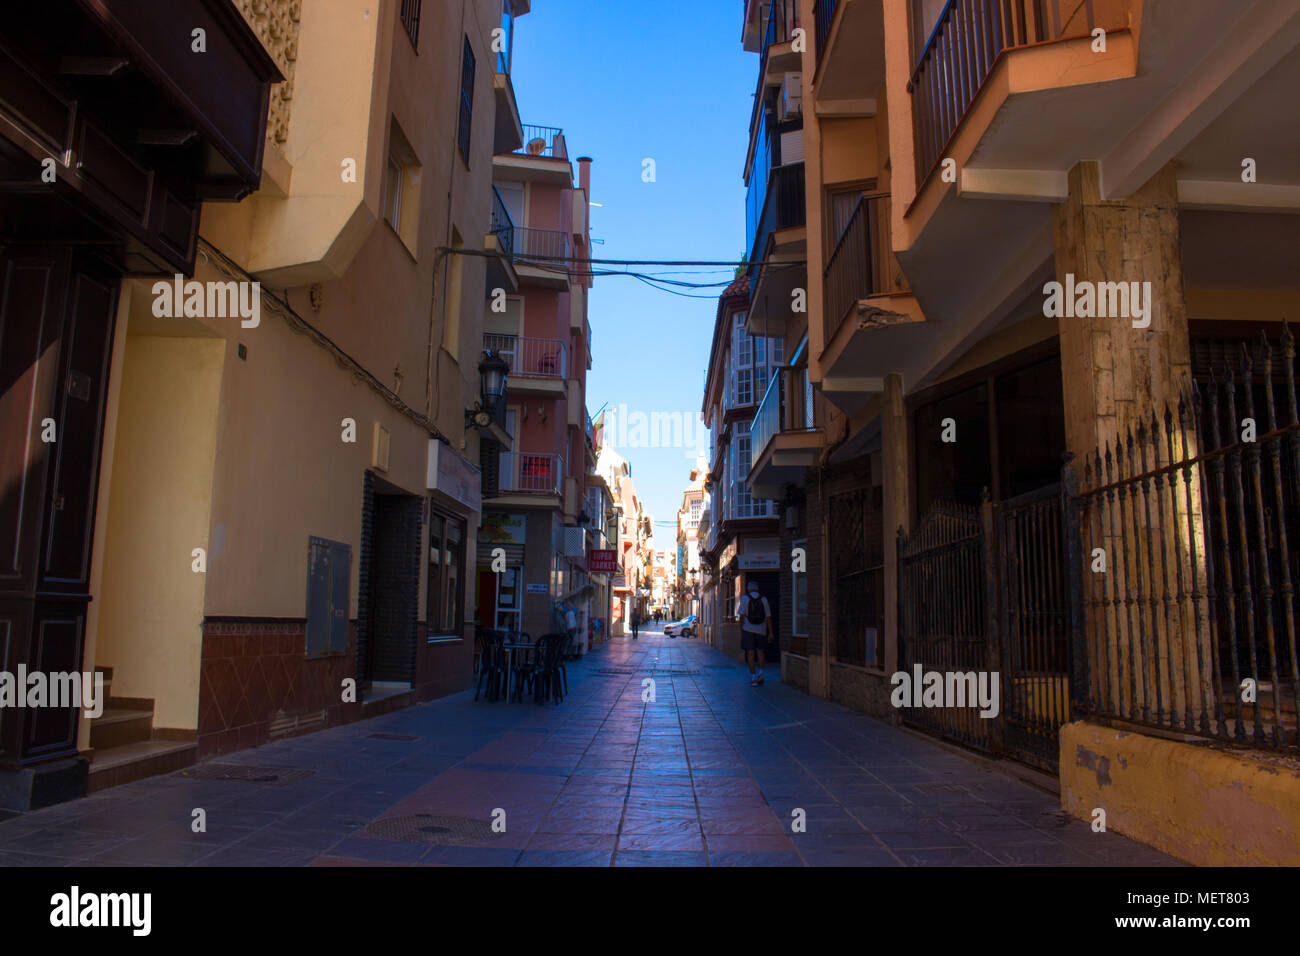 Road To Fuengirola High Resolution Stock Photography and Images - Alamy